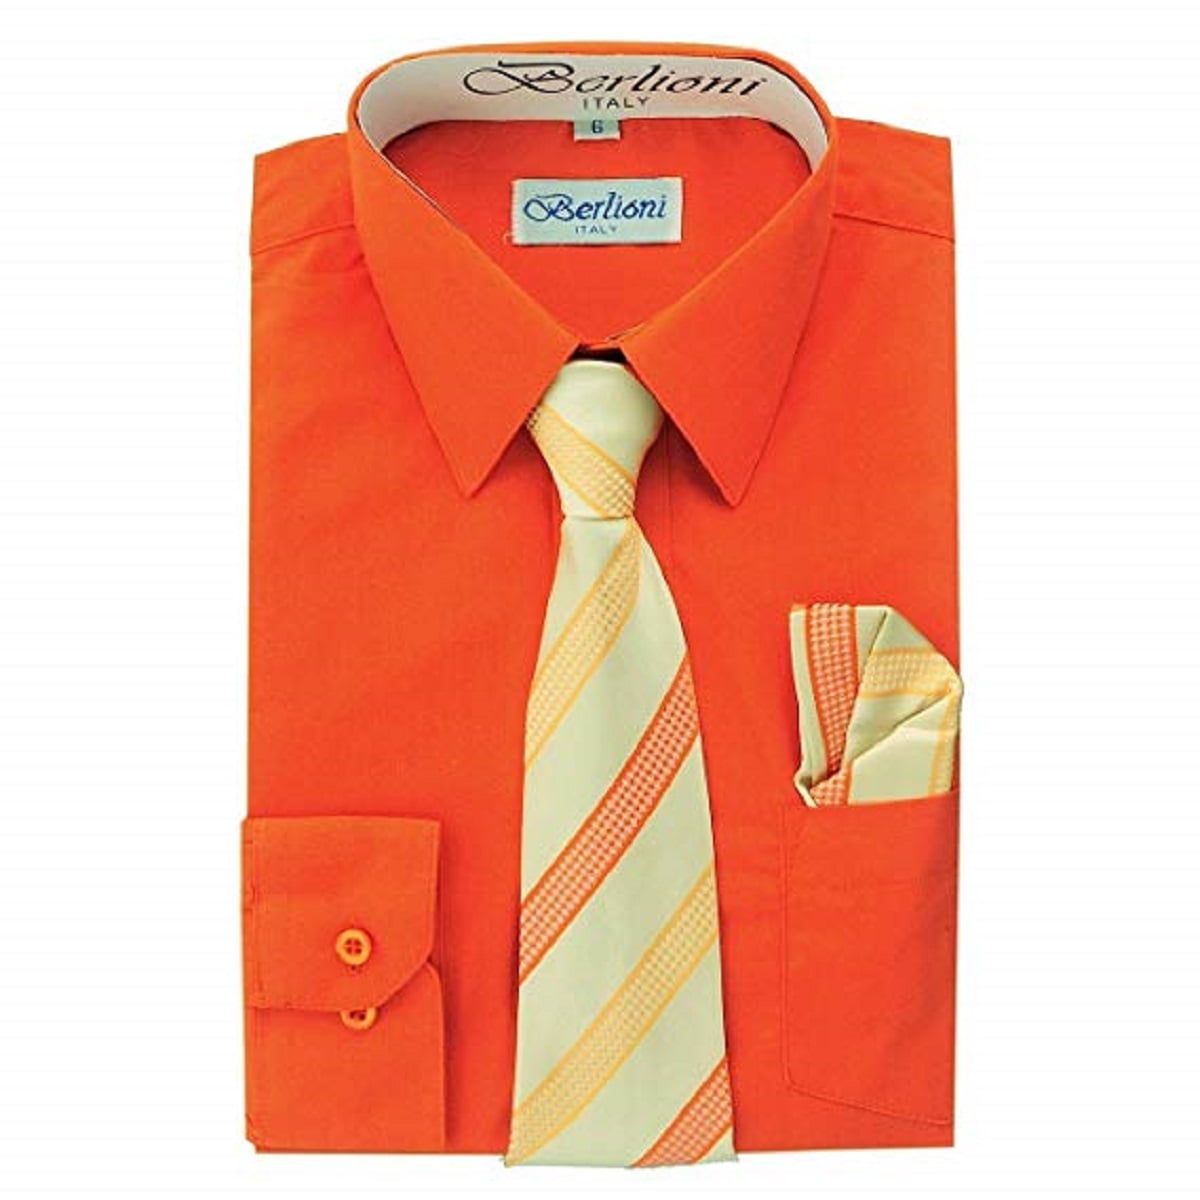 Berlioni Boy's Dress Shirt, Necktie, and Hanky Set - Many Color and ...